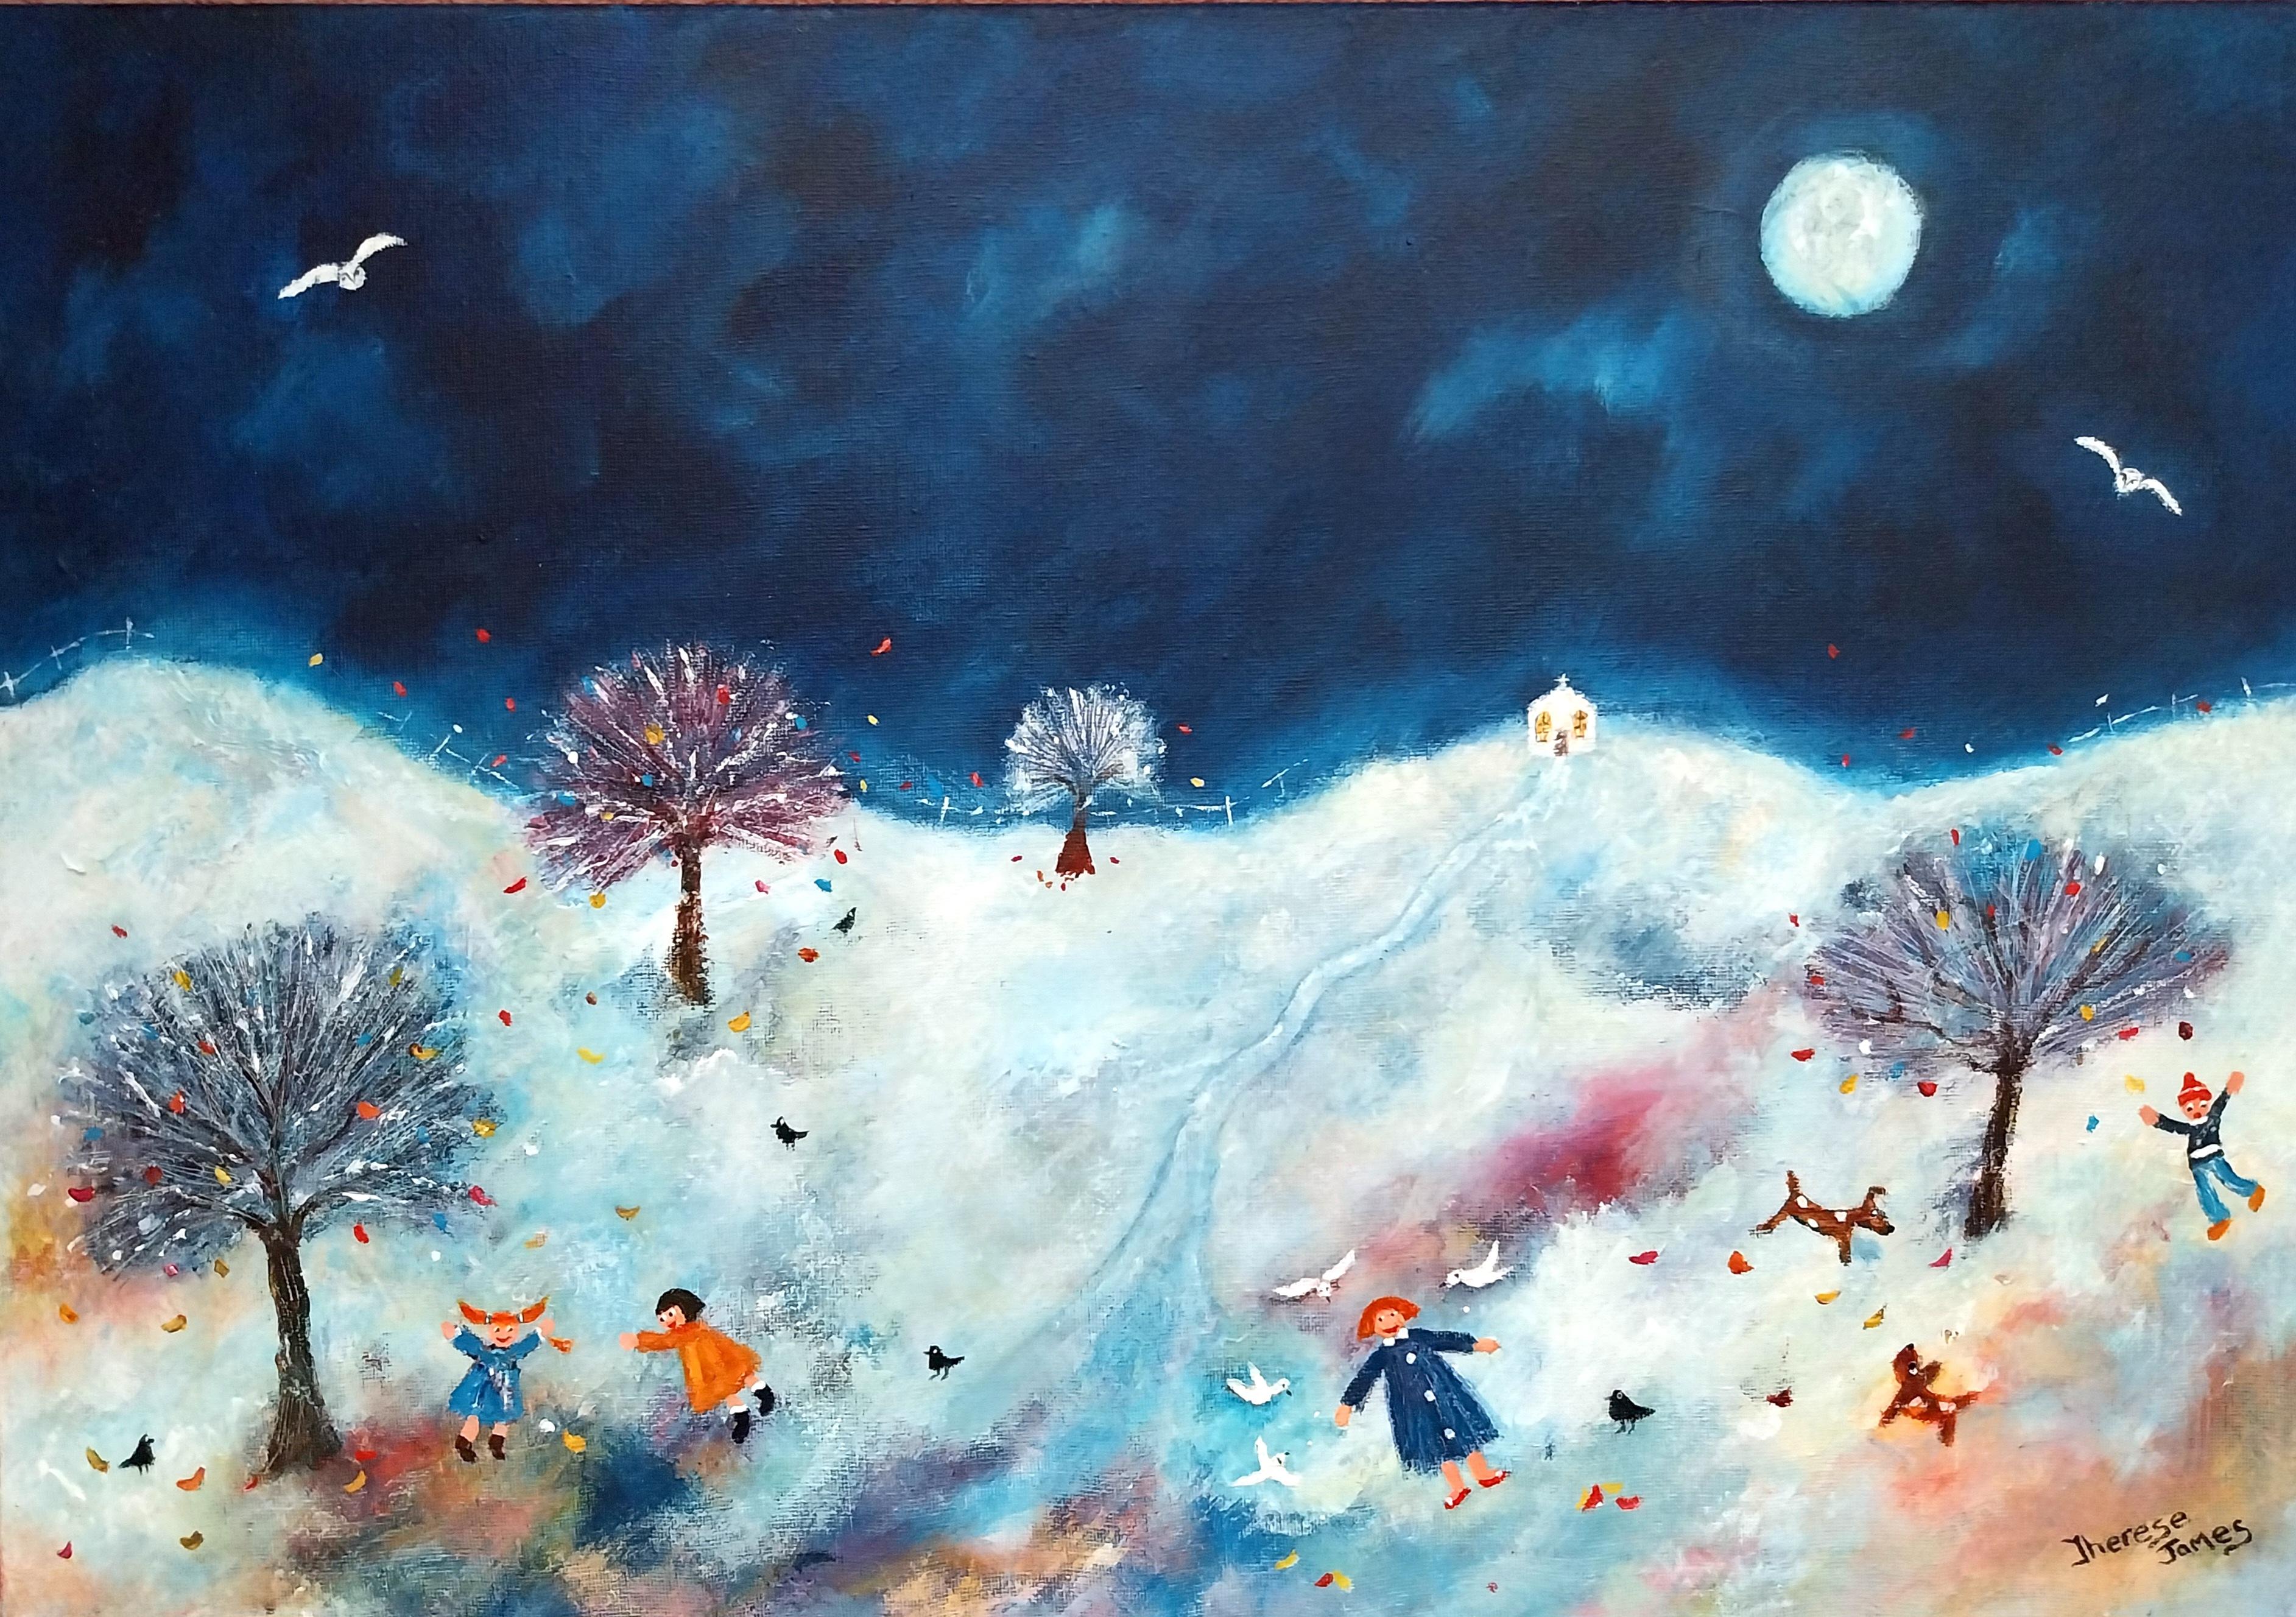 Full moon and full of fun. A joyous frolic throuugh the snow at the height of the moon which glints off the snow with a scintillating light. You would be hard pressed to find more fun in any painting and it’s just one of the reasons why Therese